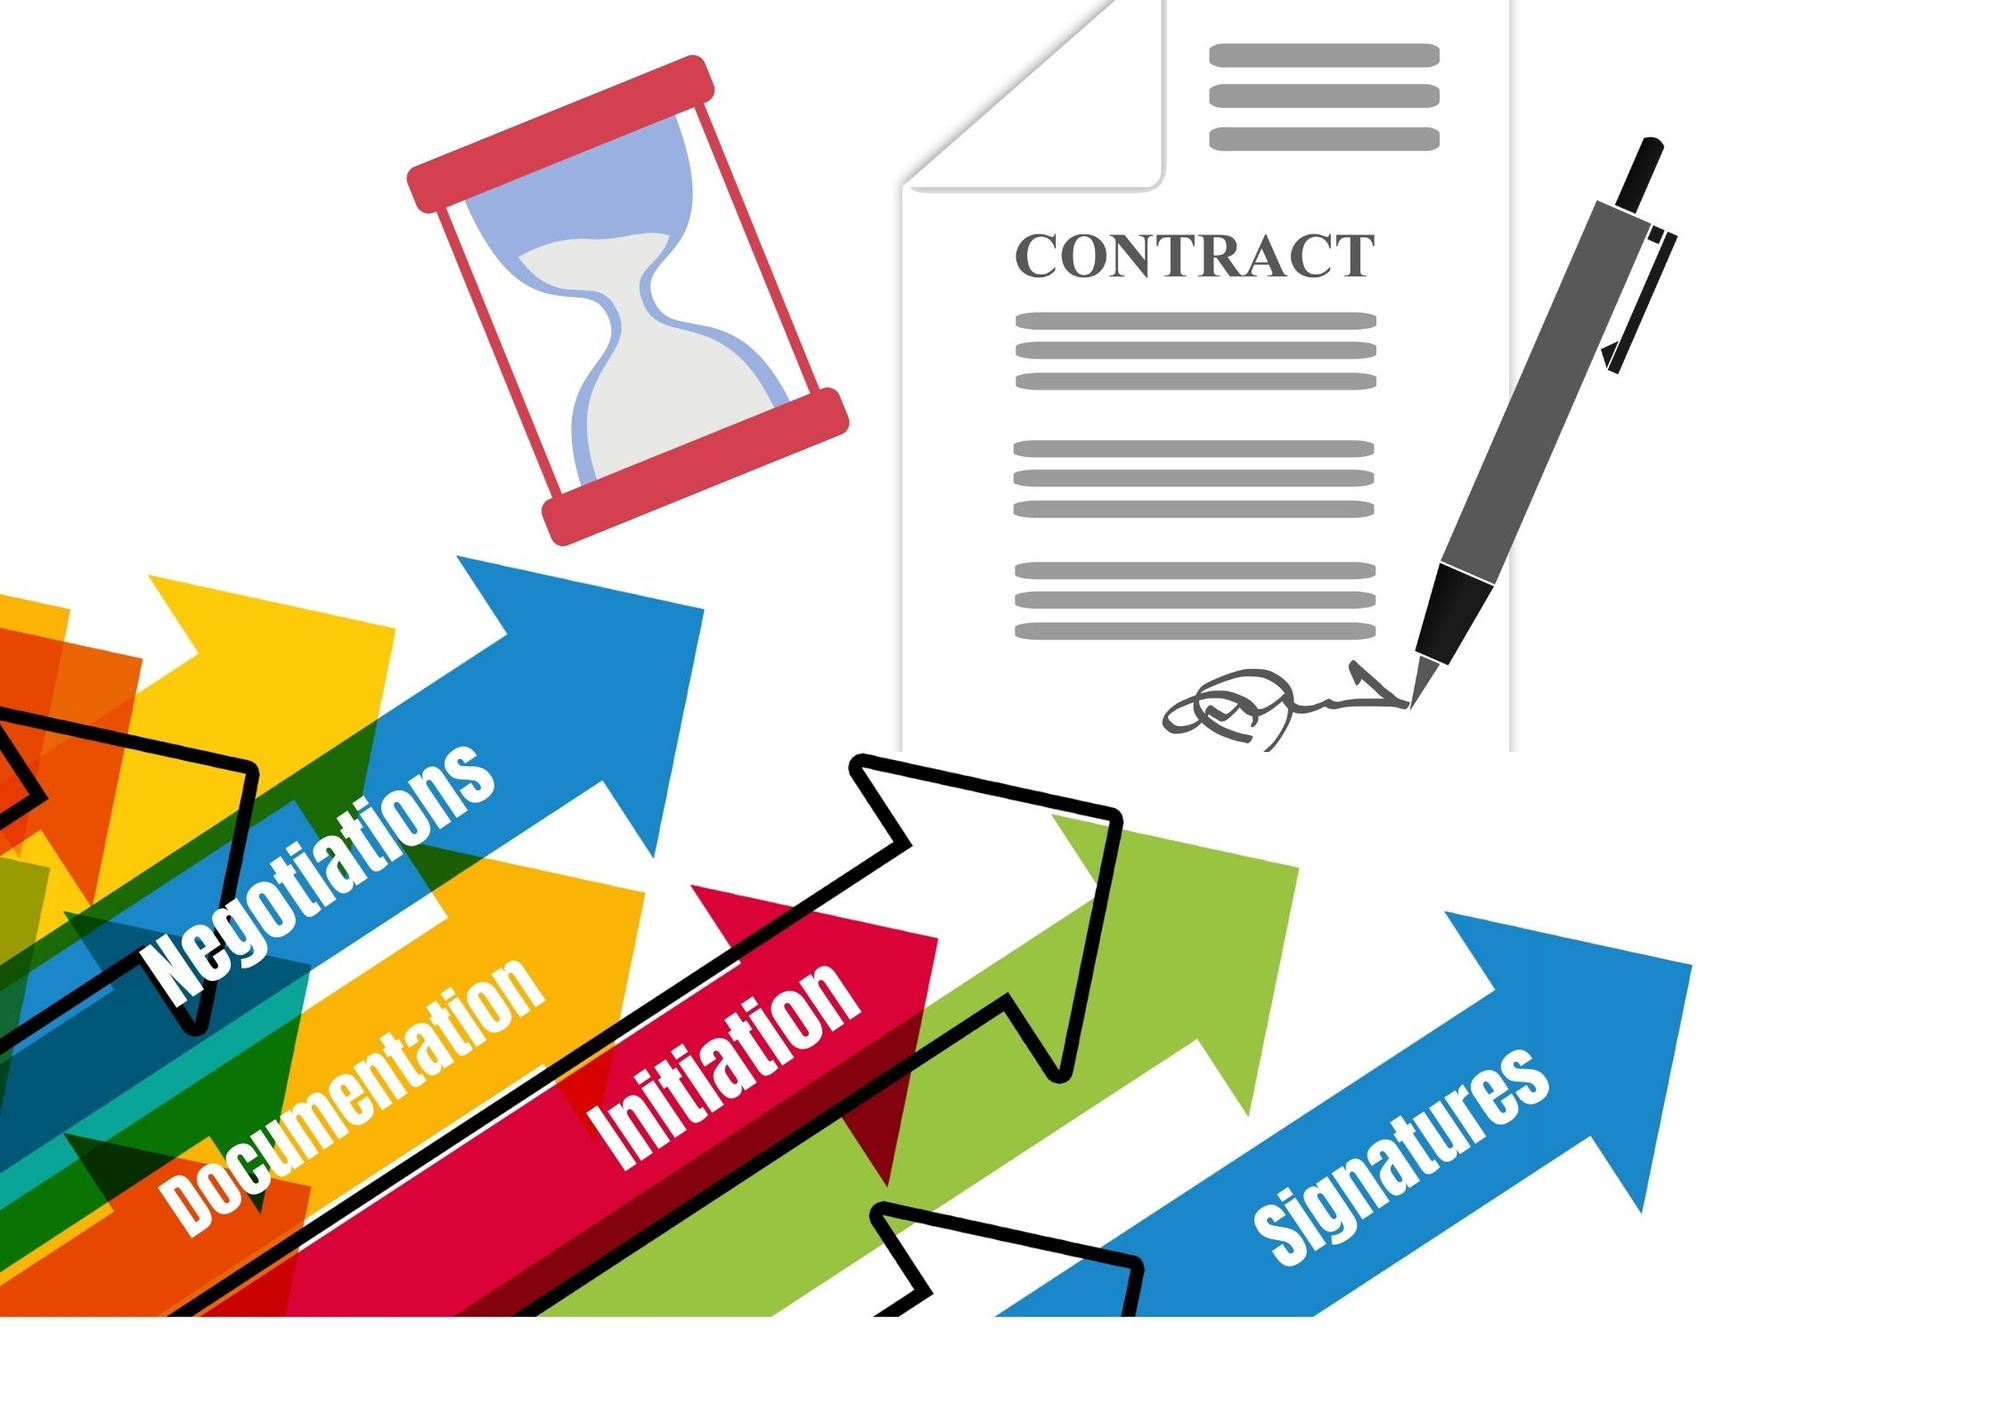 Why are contracts hard to digitize?